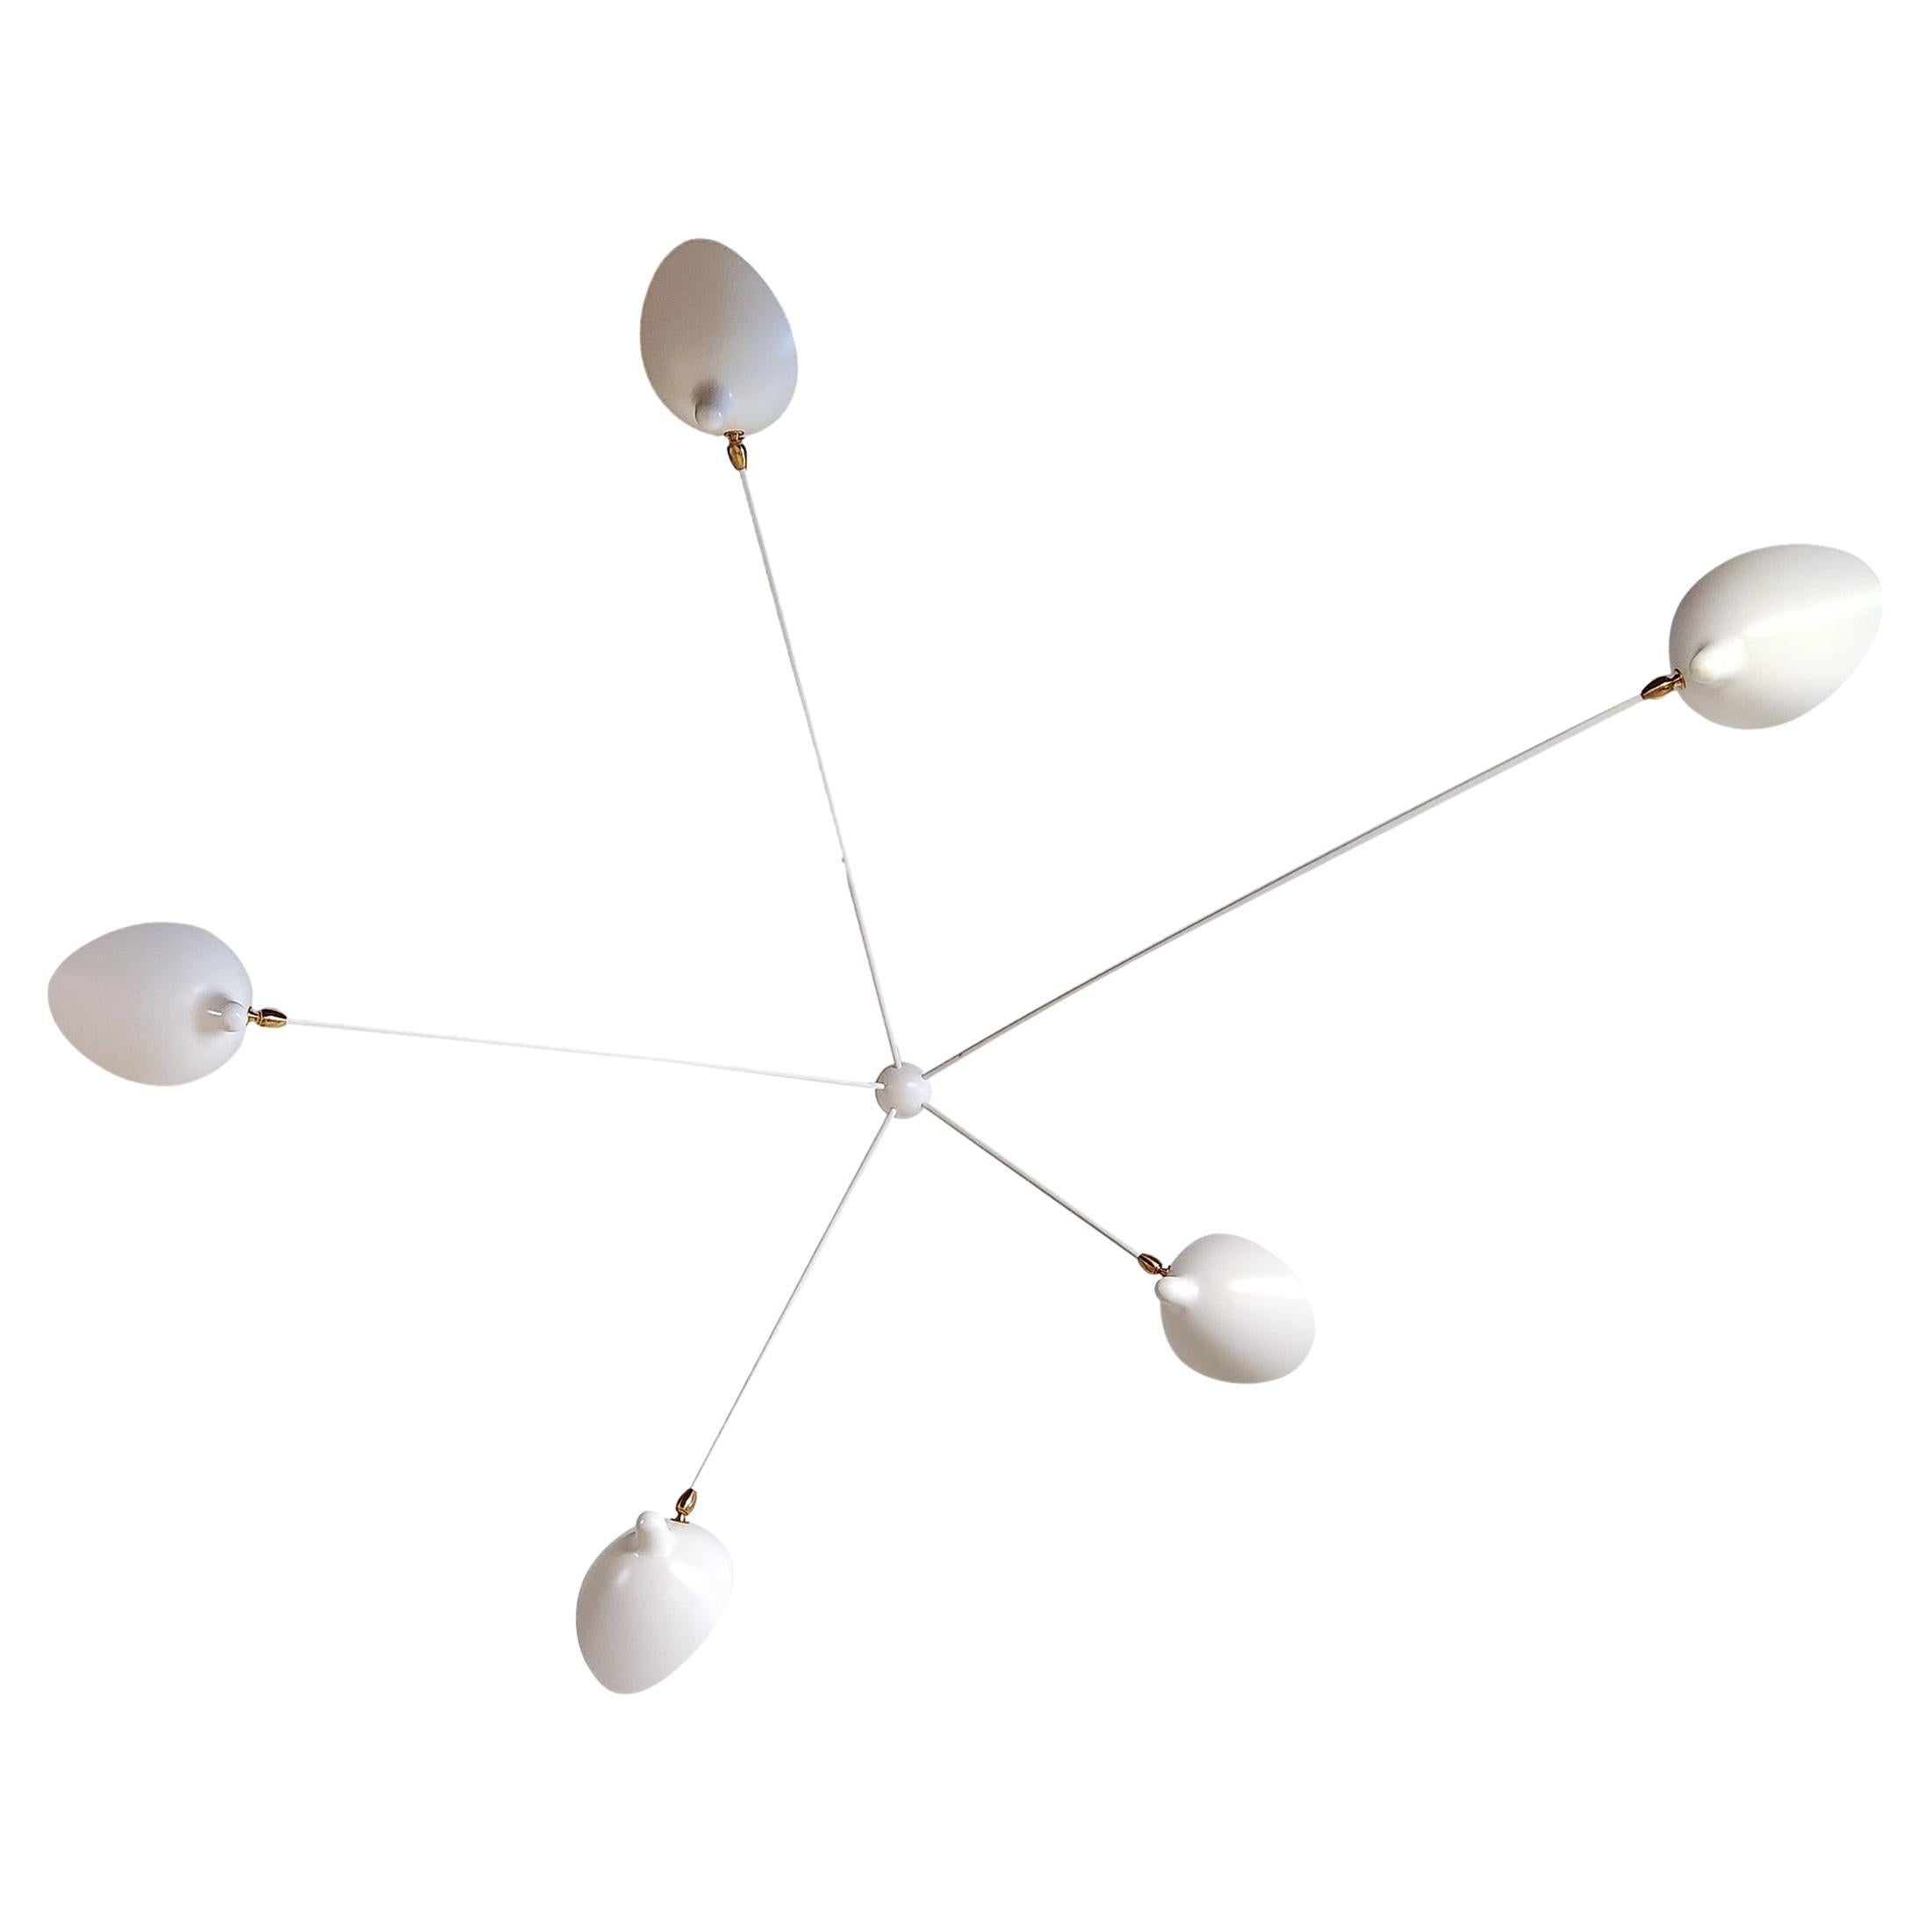 Serge Mouille - Spider Sconce with 5 Arms in White or Black